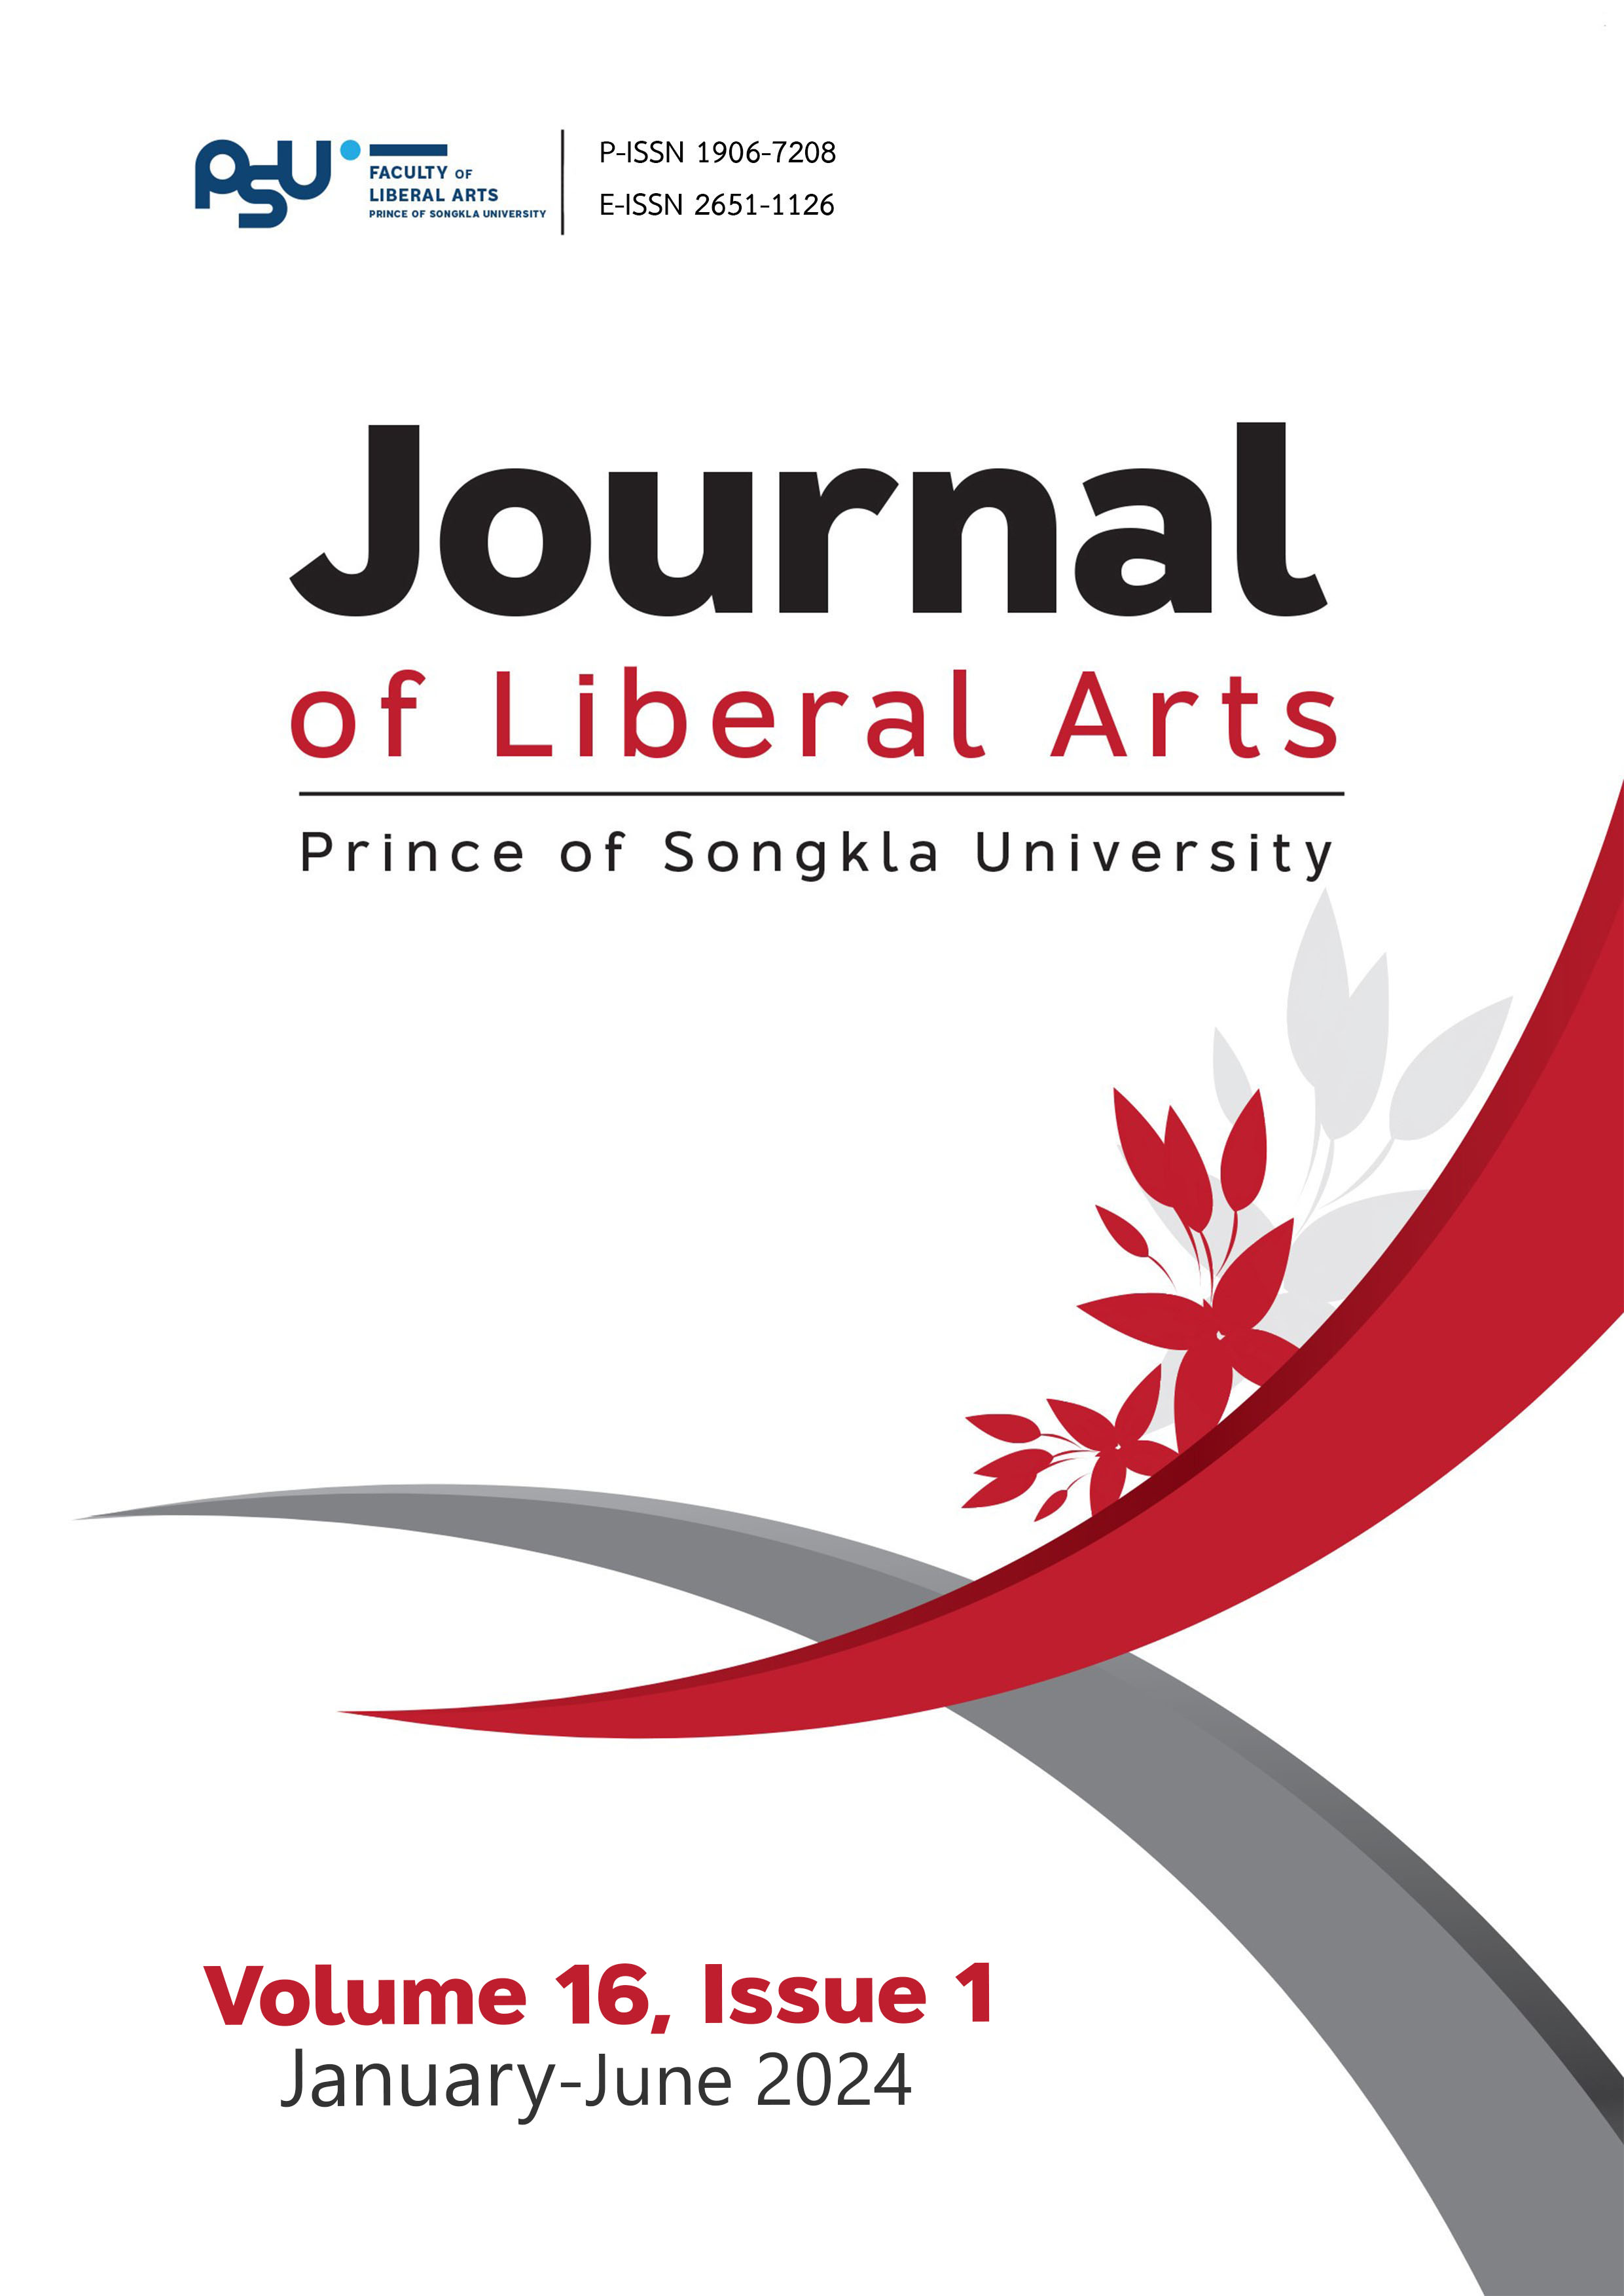 					View Vol. 16 No. 1 (2024): Journal of liberal Arts , Prince of Songkla University 
				